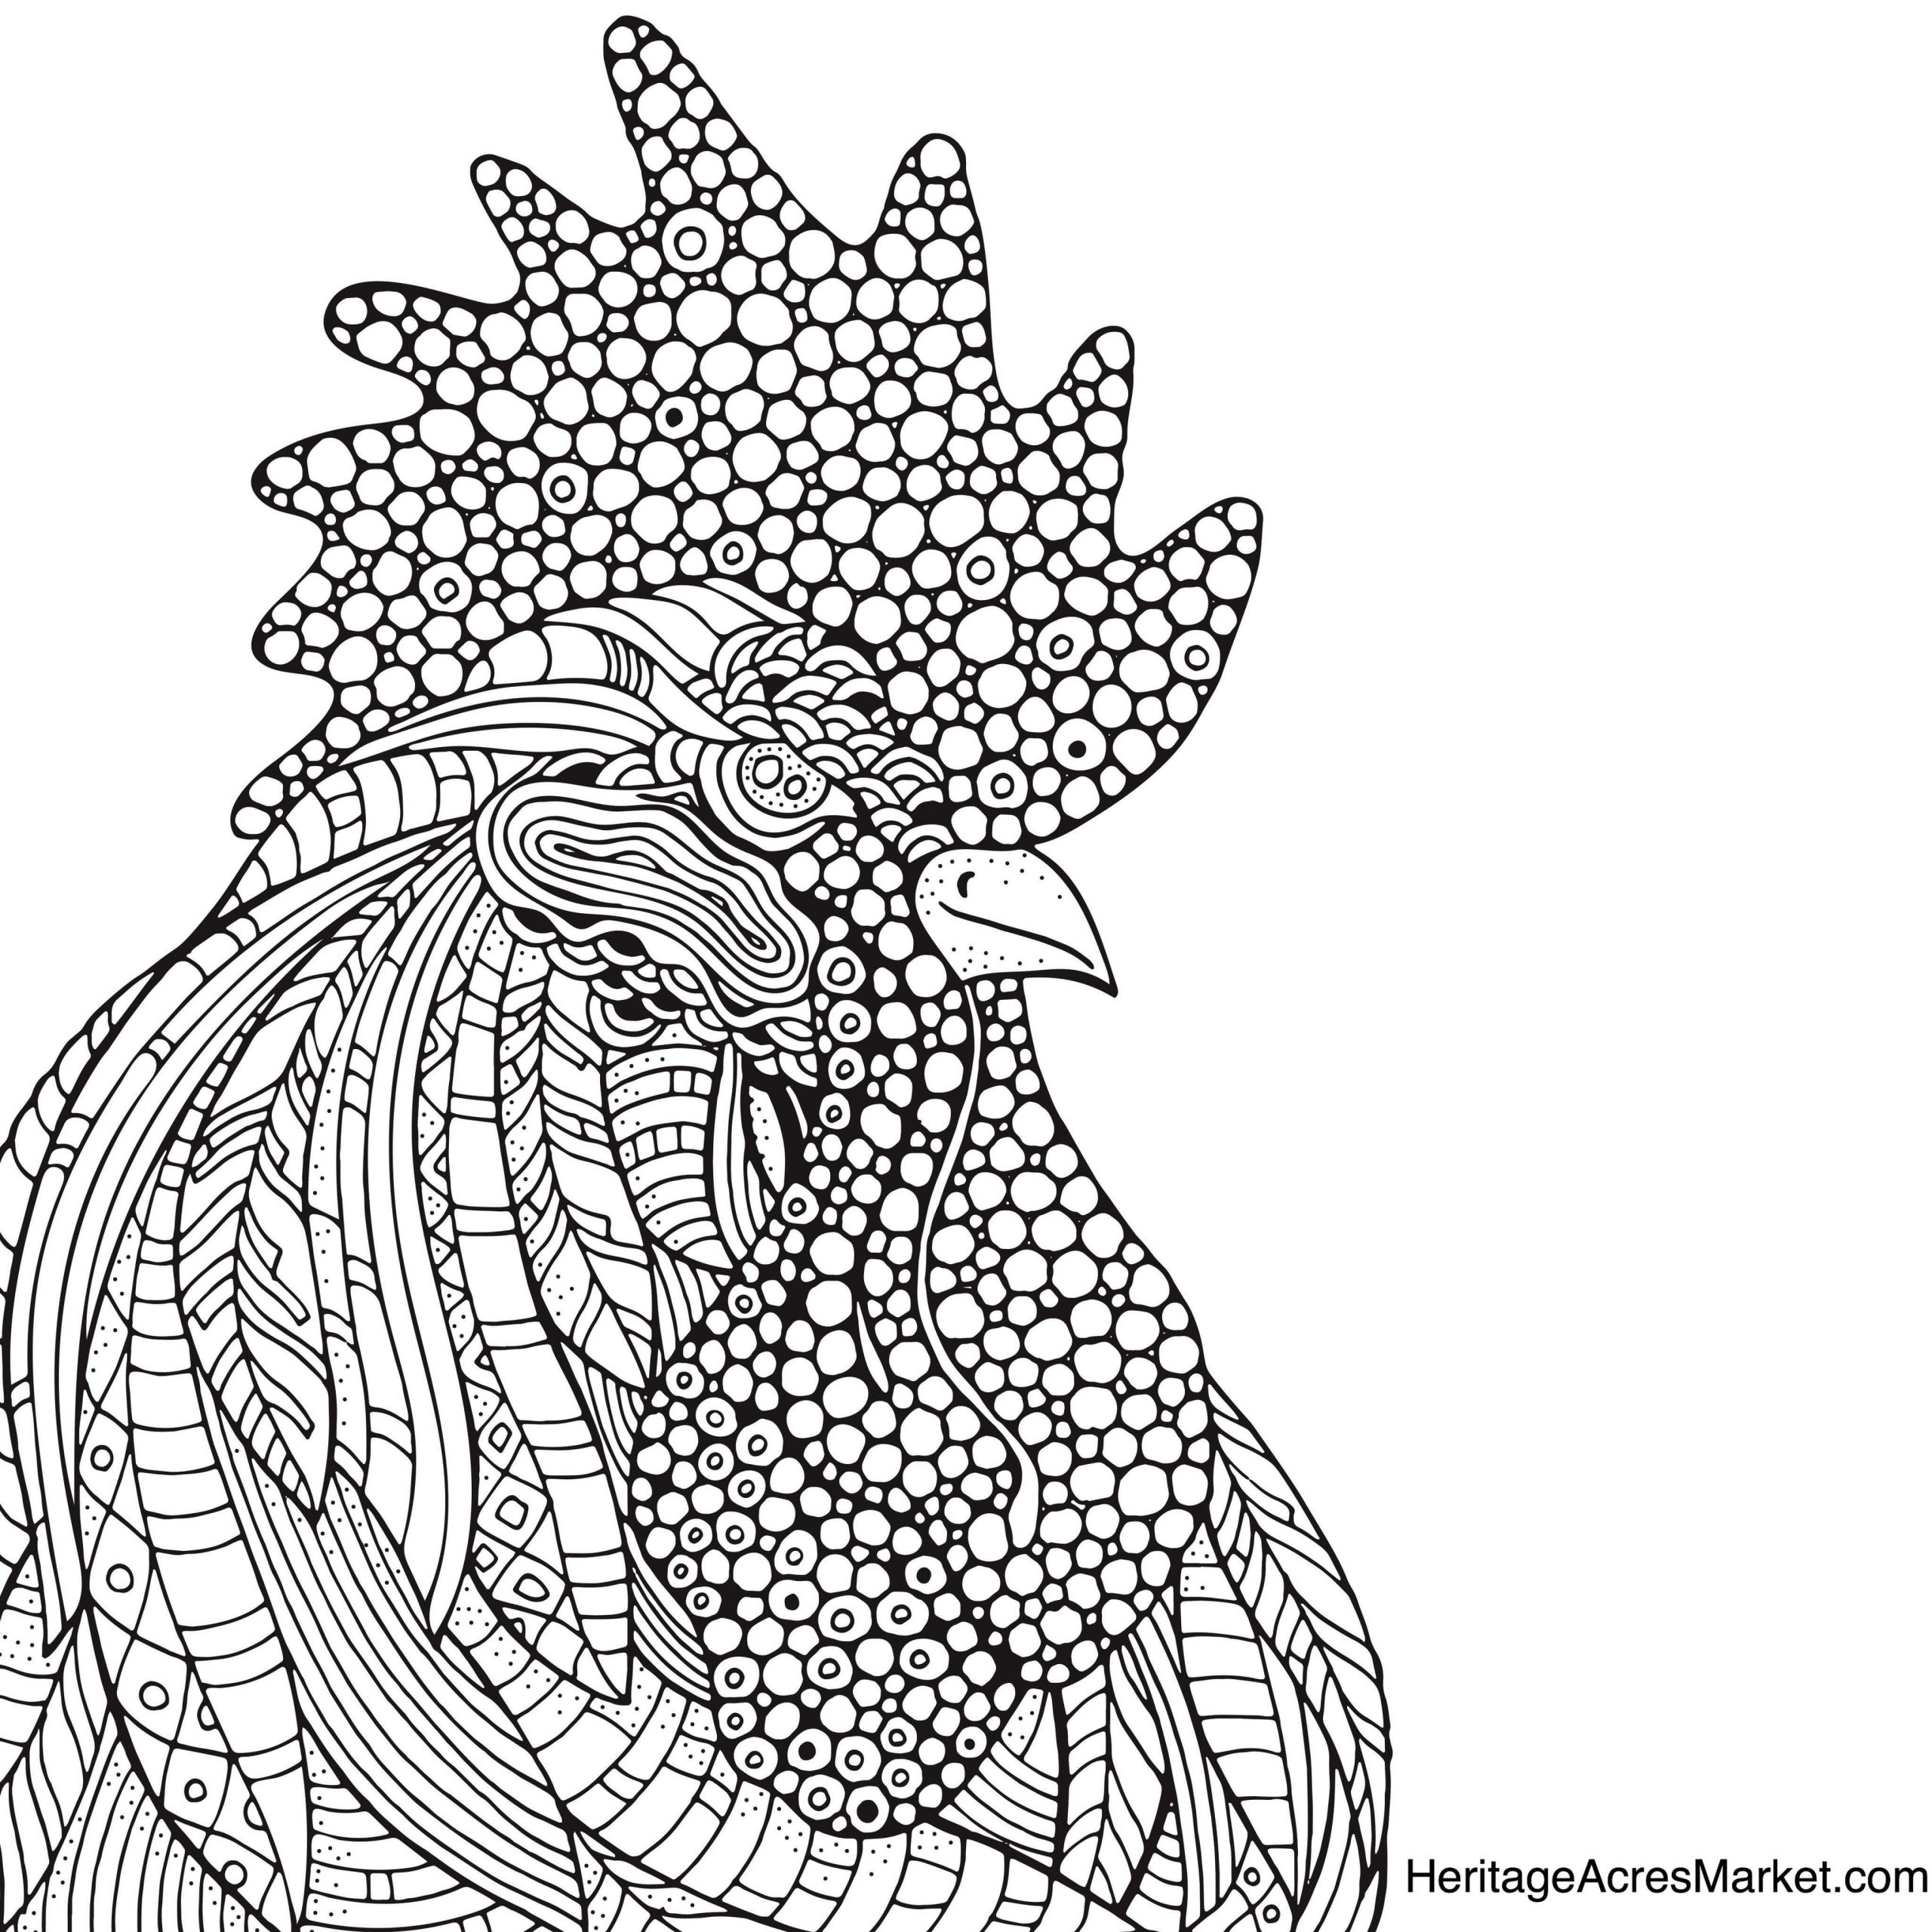 Chicken Coloring Pages For Adults
 Rooster Coloring Page Heritage Acres Market LLC